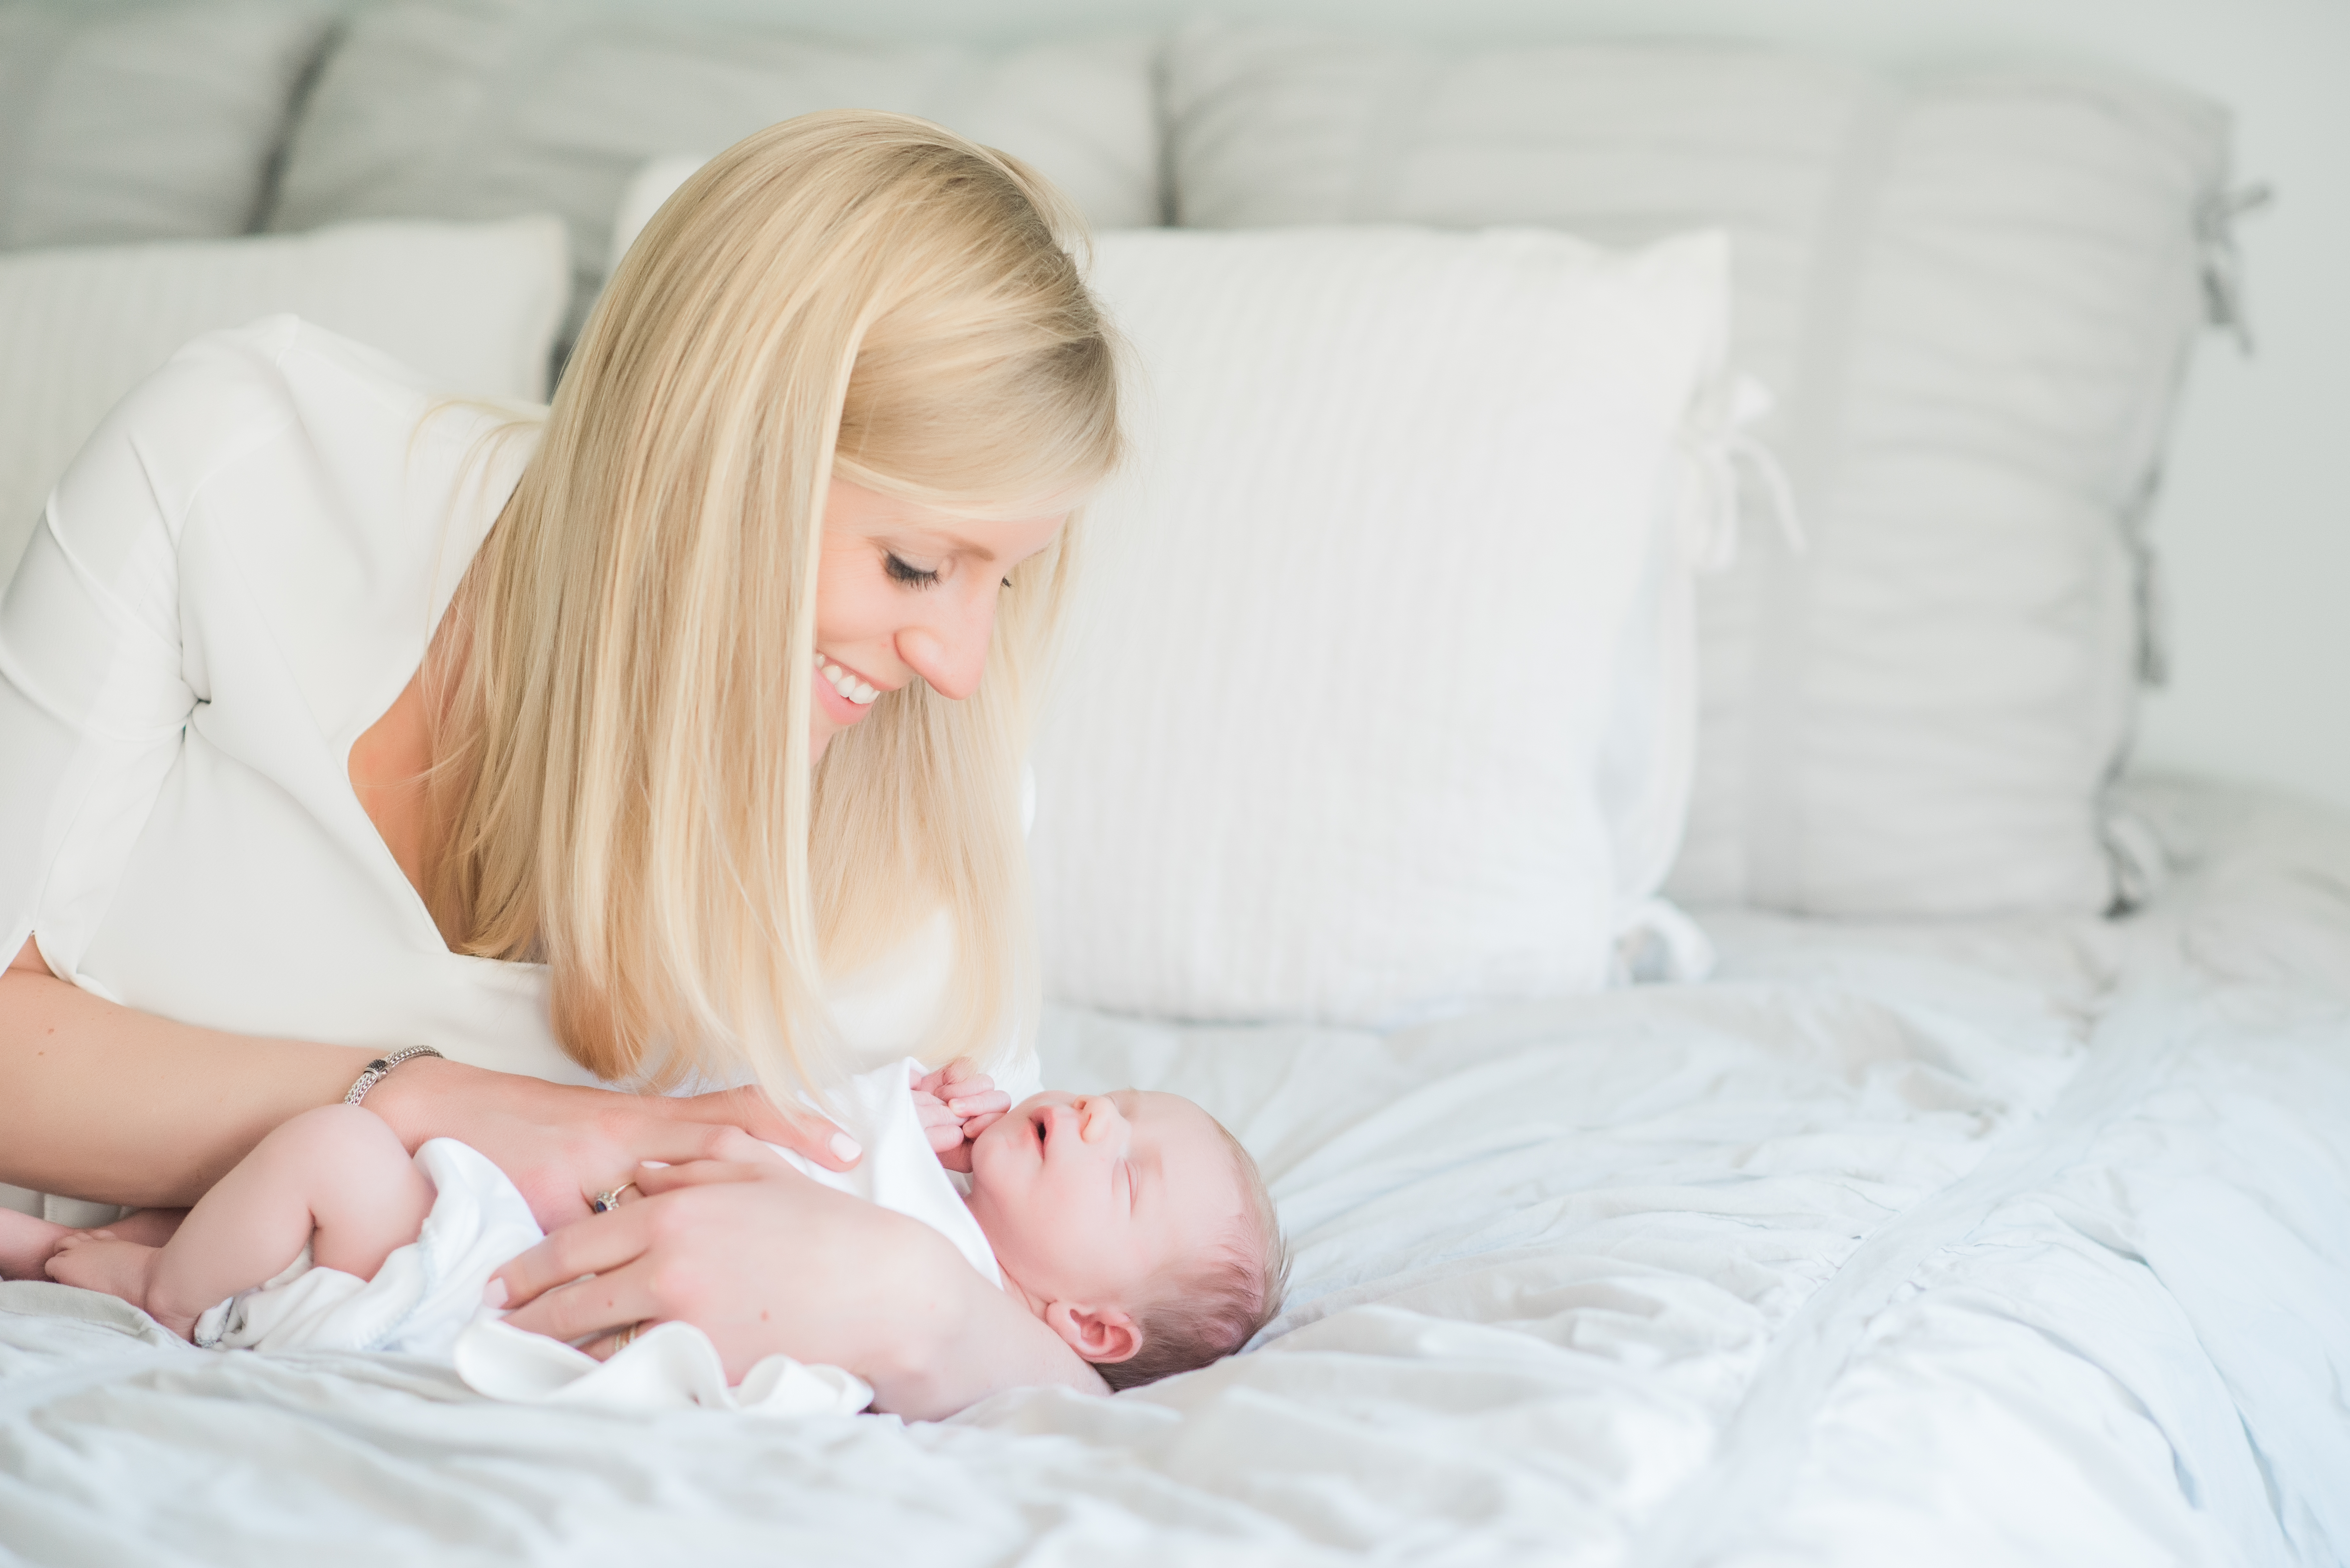 Lifestyle Newborn Photographer | How to Deal with Judgement as Mom |  Best Advice for New Moms